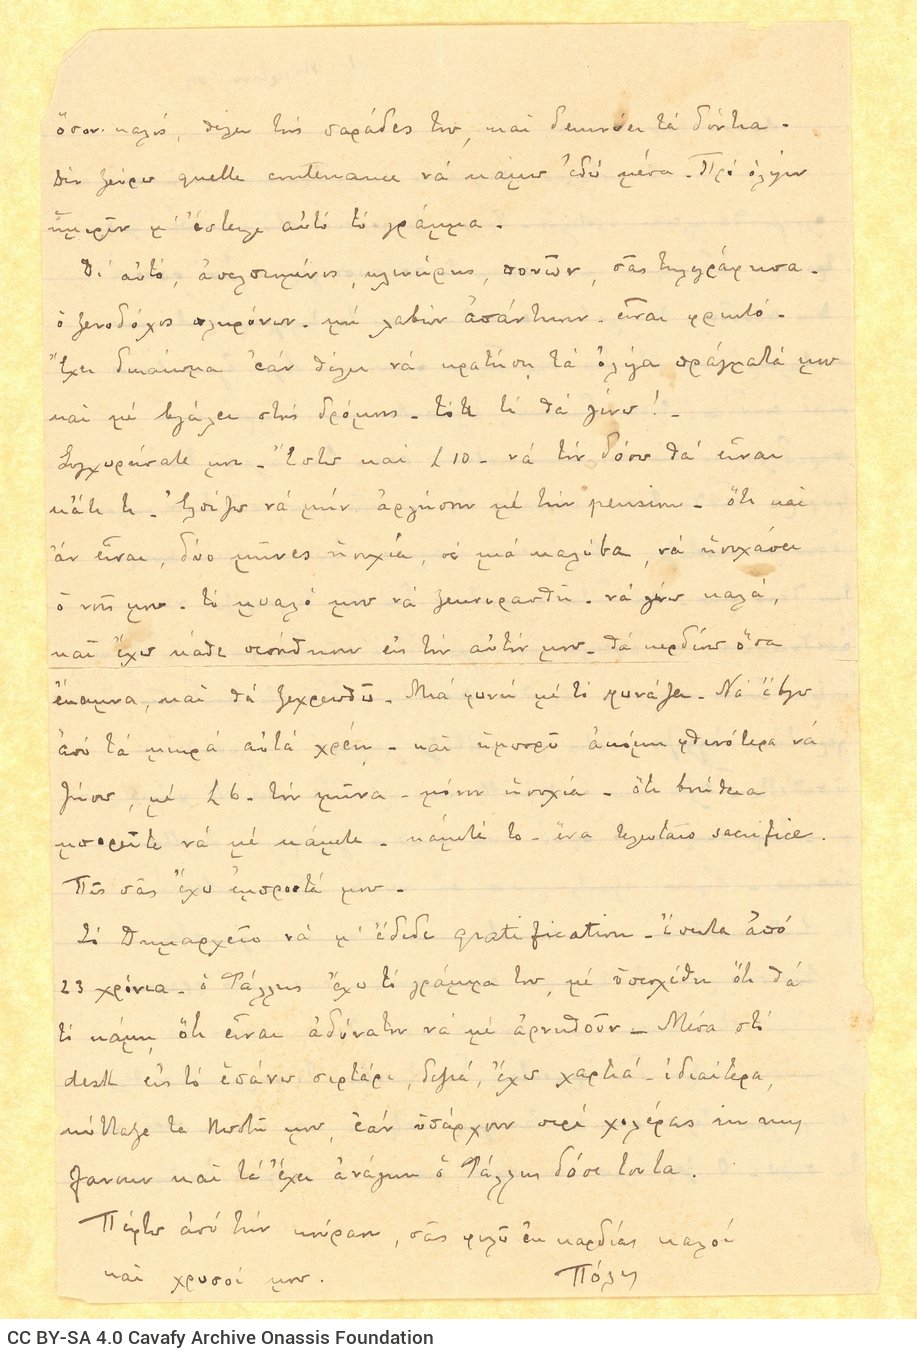 Handwritten letter by Paul Cavafy from France to C. P. Cavafy and John Cavafy, on both sides of a sheet. Comments on telegram